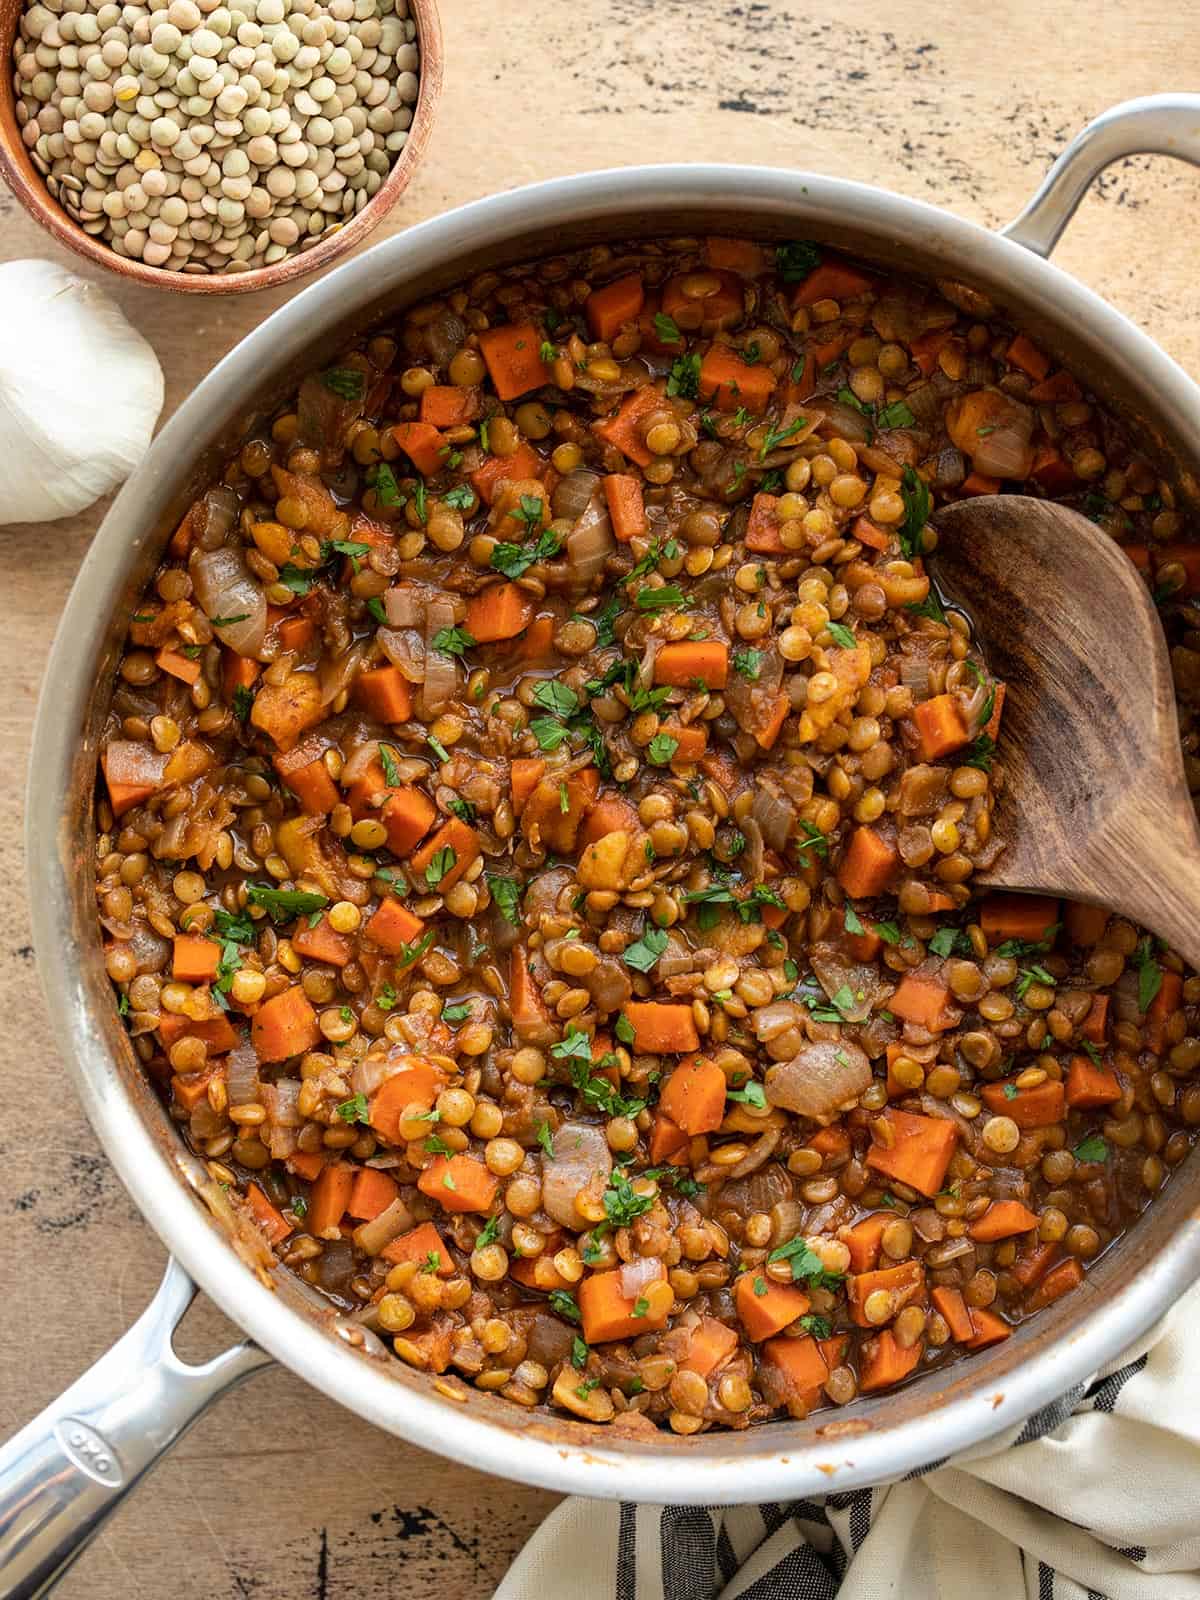 Lentils as a budget-friendly ingredient